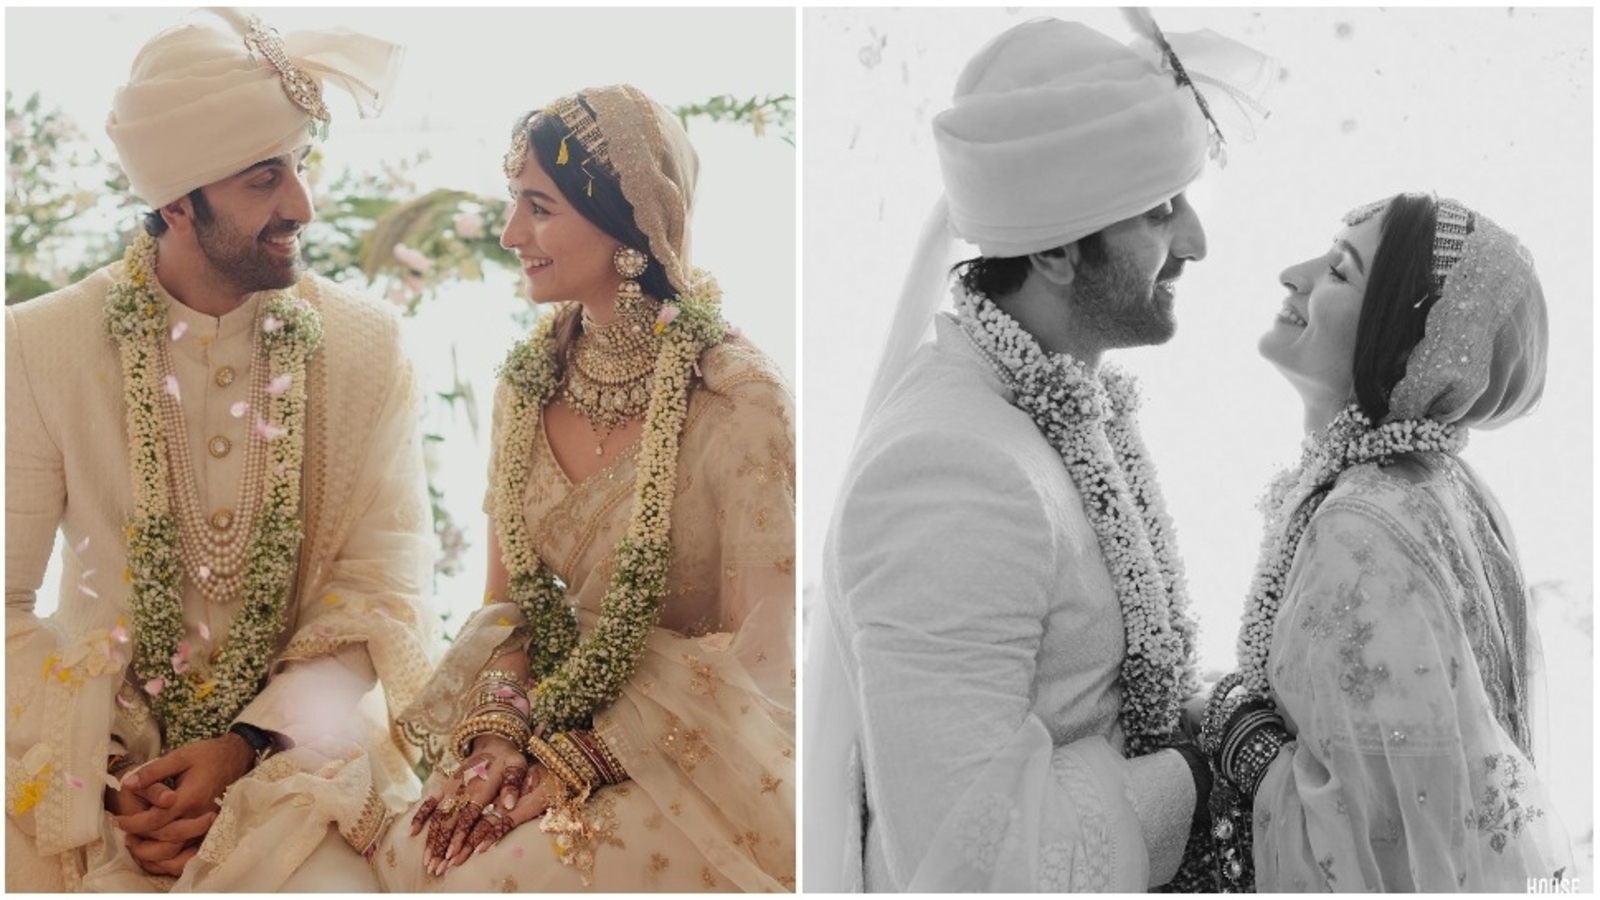 Alia Bhatt and Ranbir Kapoor smile and look into each other’s eyes in unseen wedding pics. See here